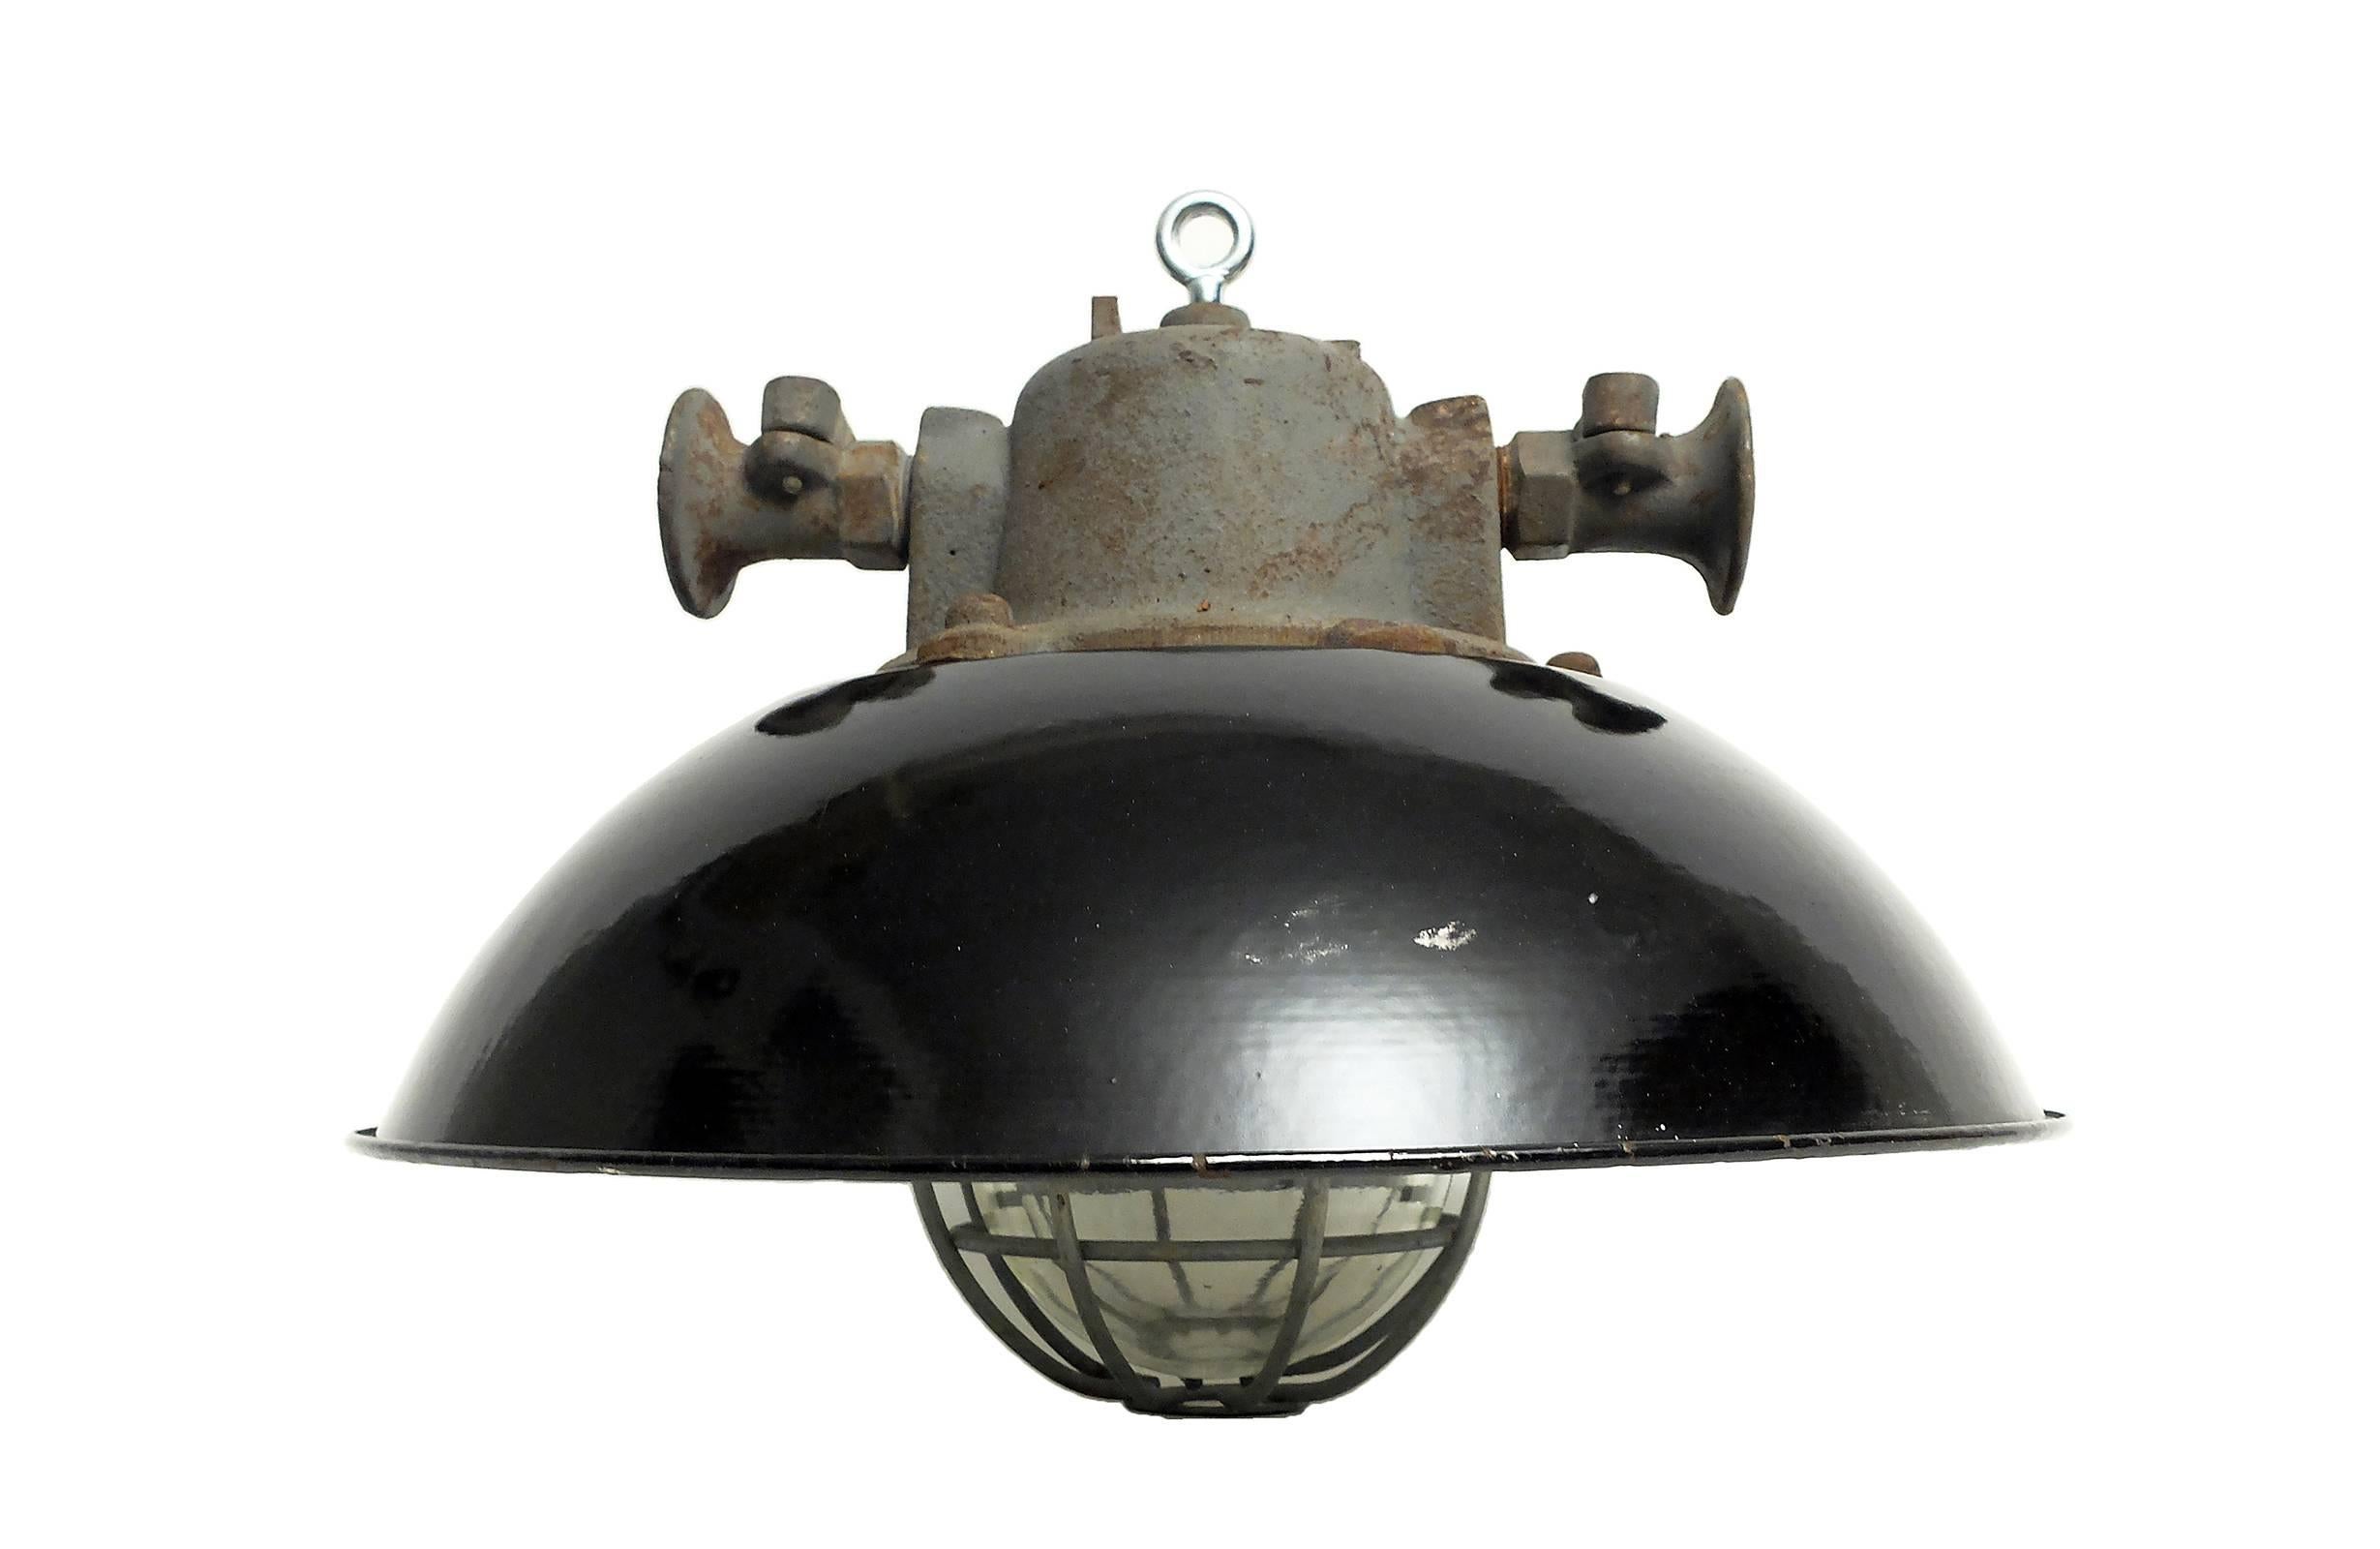 Ceiling lamps with cast iron top, dome-shaped shade, and caged thick glass.
Made in Czechoslovakia, circa 1940. Excellent original shape and patina. Six available, priced per light.
 